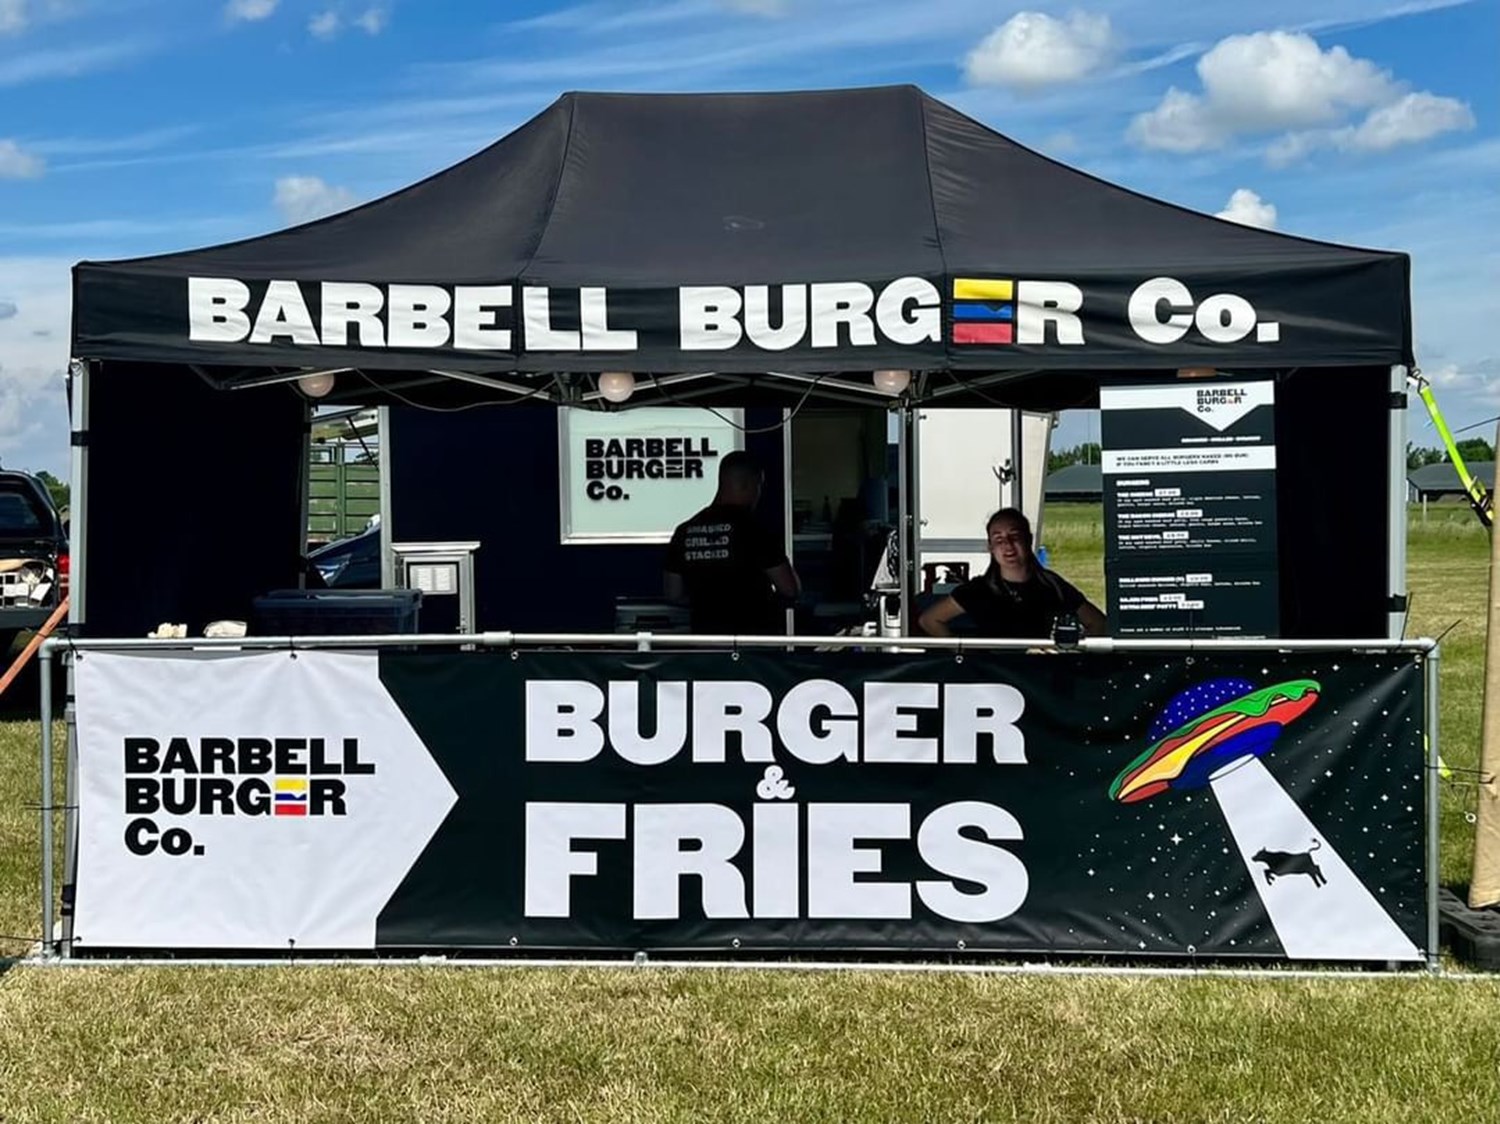 GET TO KNOW OUR TRADERS - BARBELL BURGER